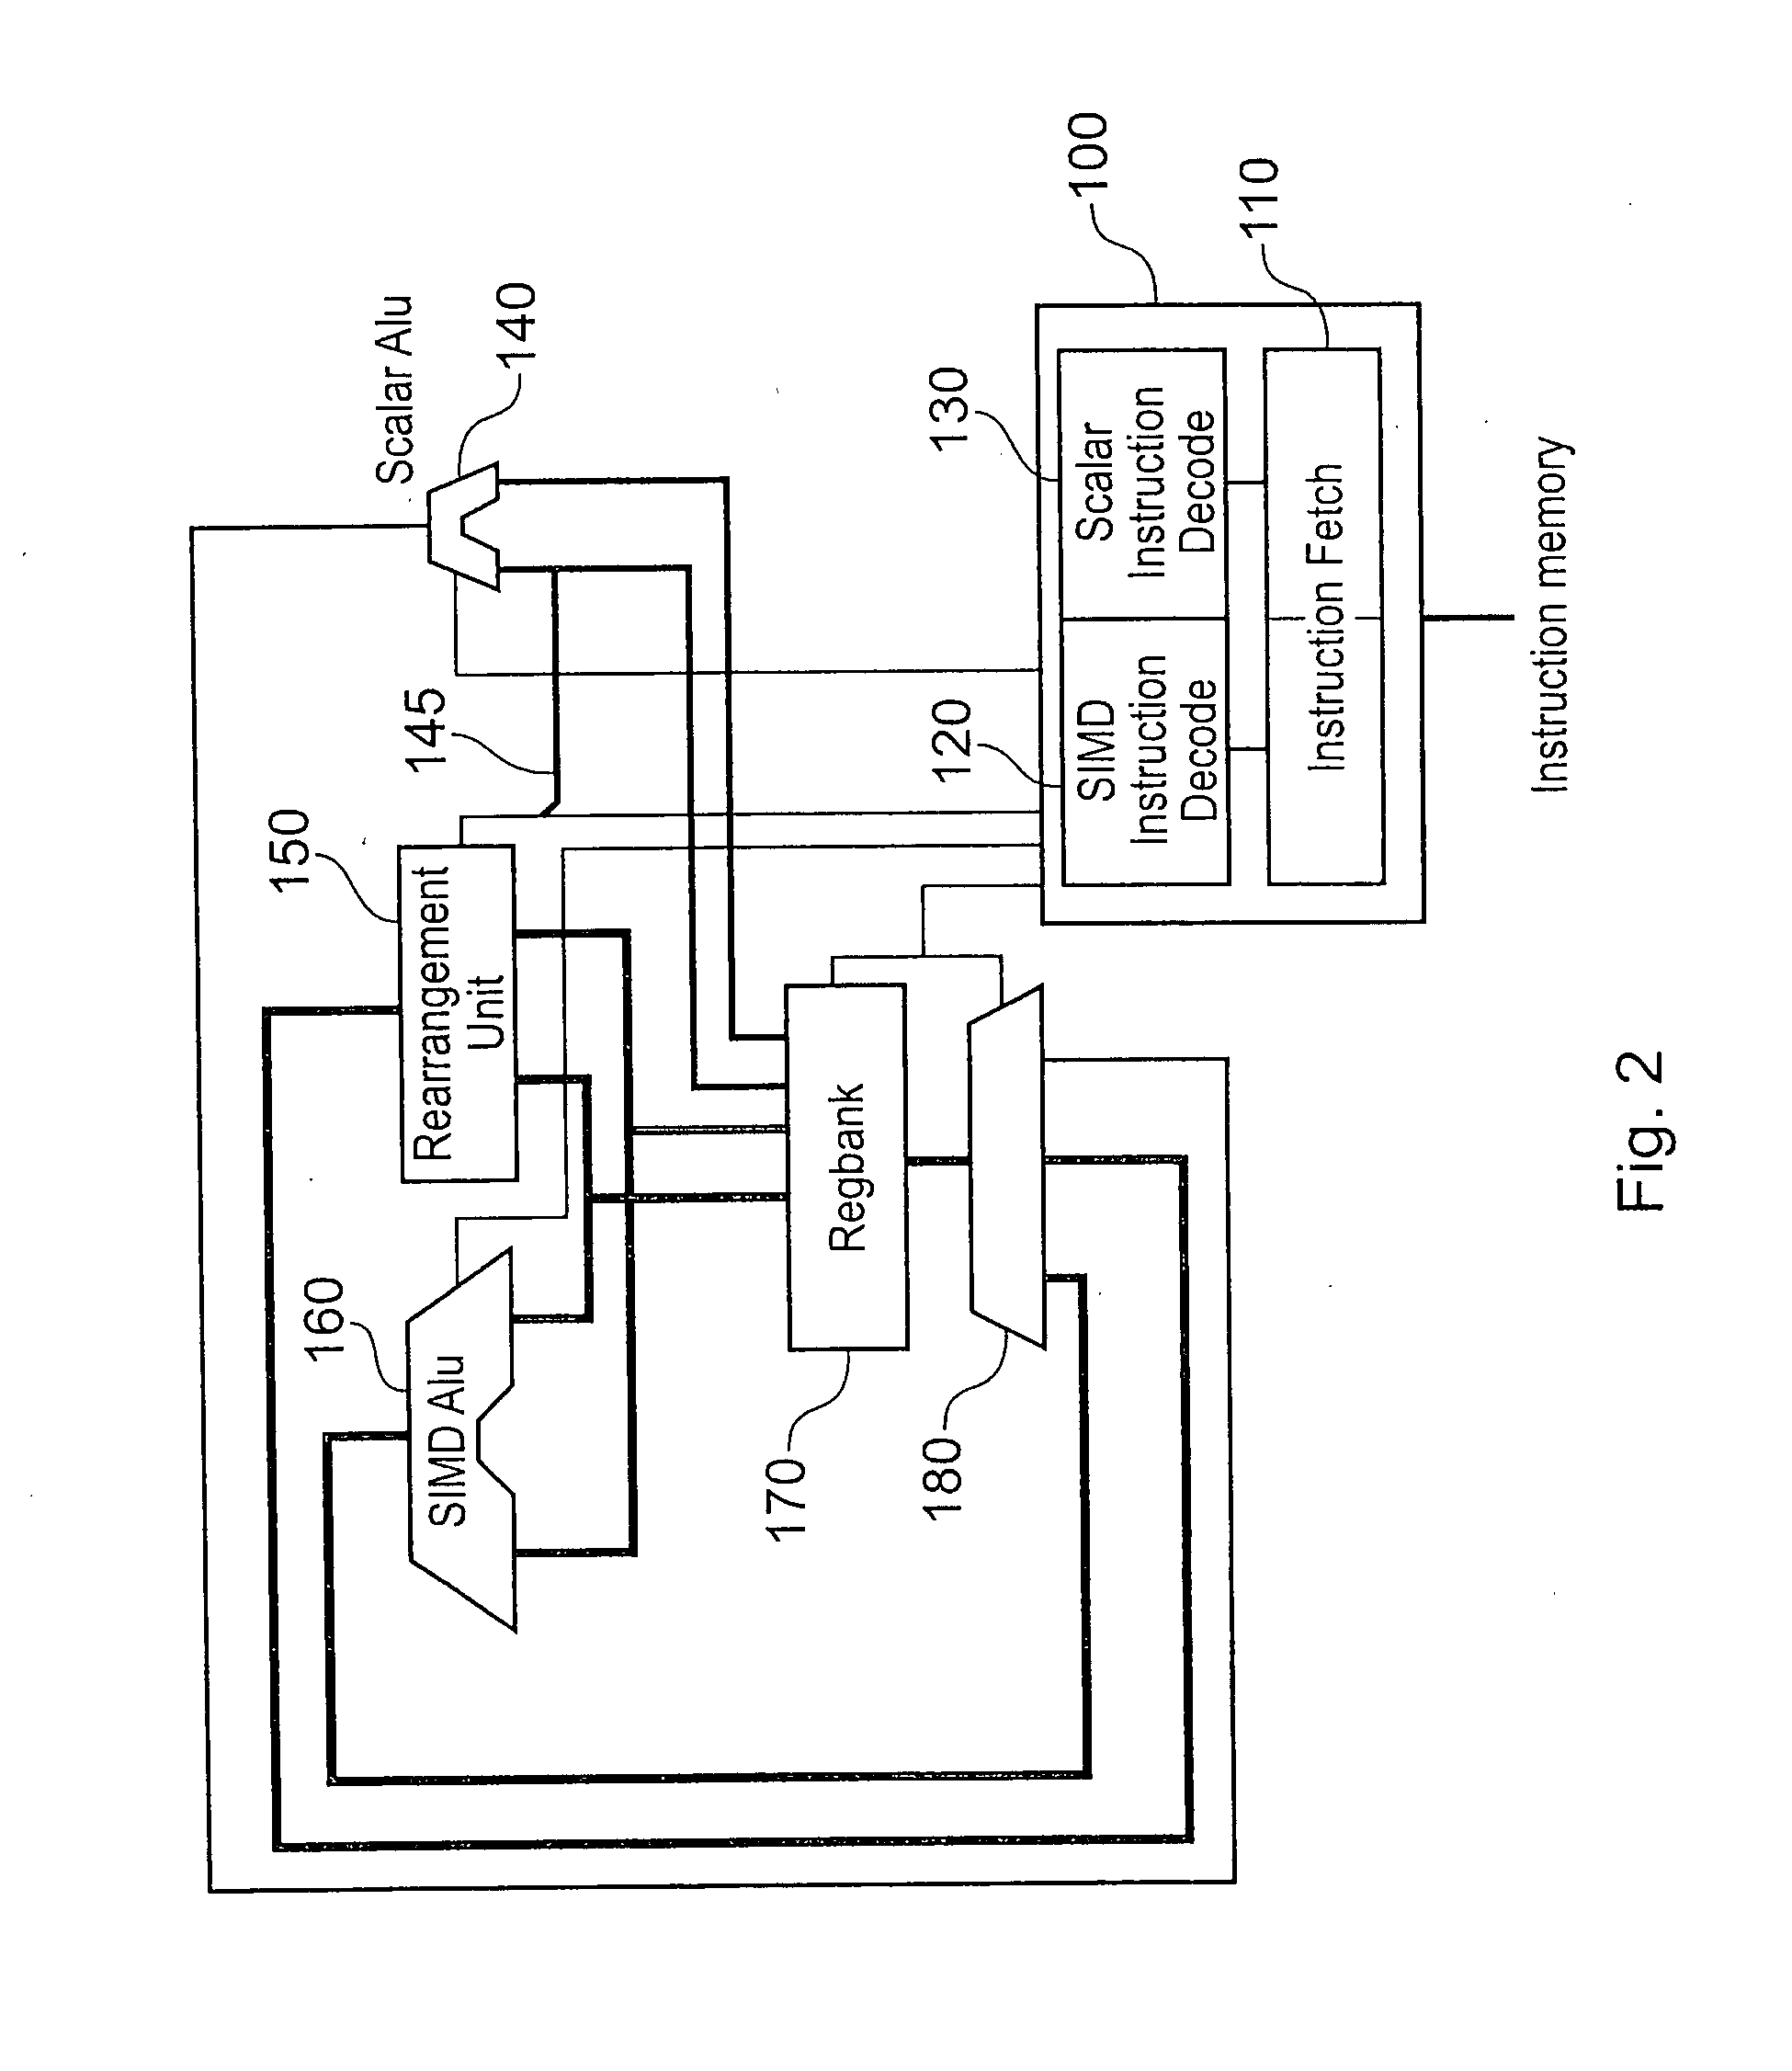 Apparatus and method for performing re-arrangement operations on data